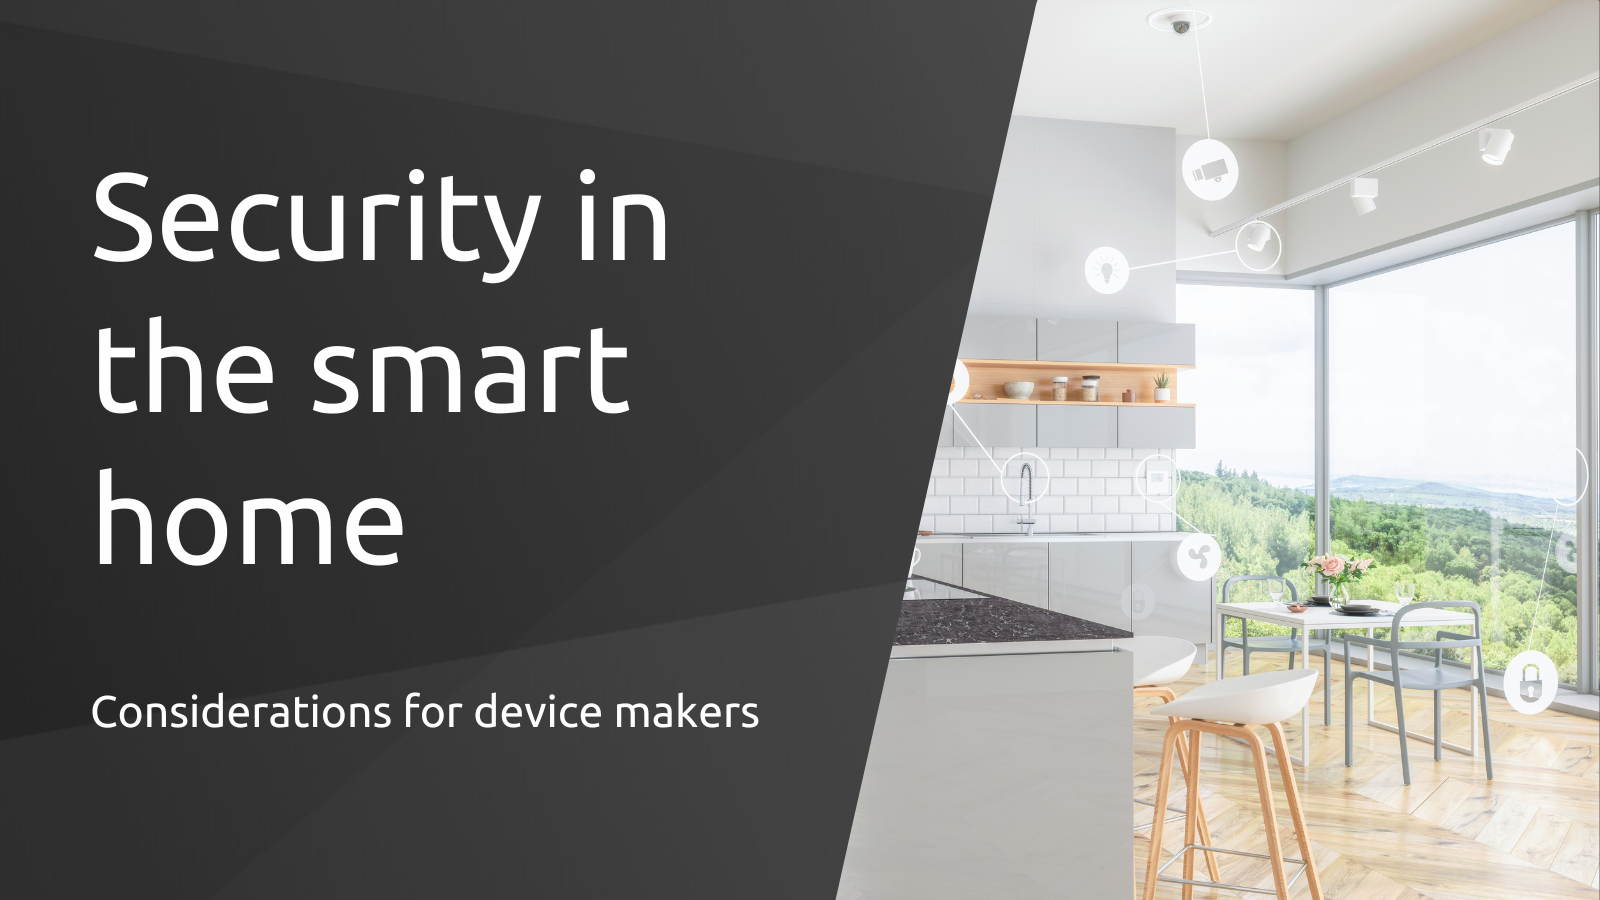 Bosch Smart Home and Yale join forces to create a secure home